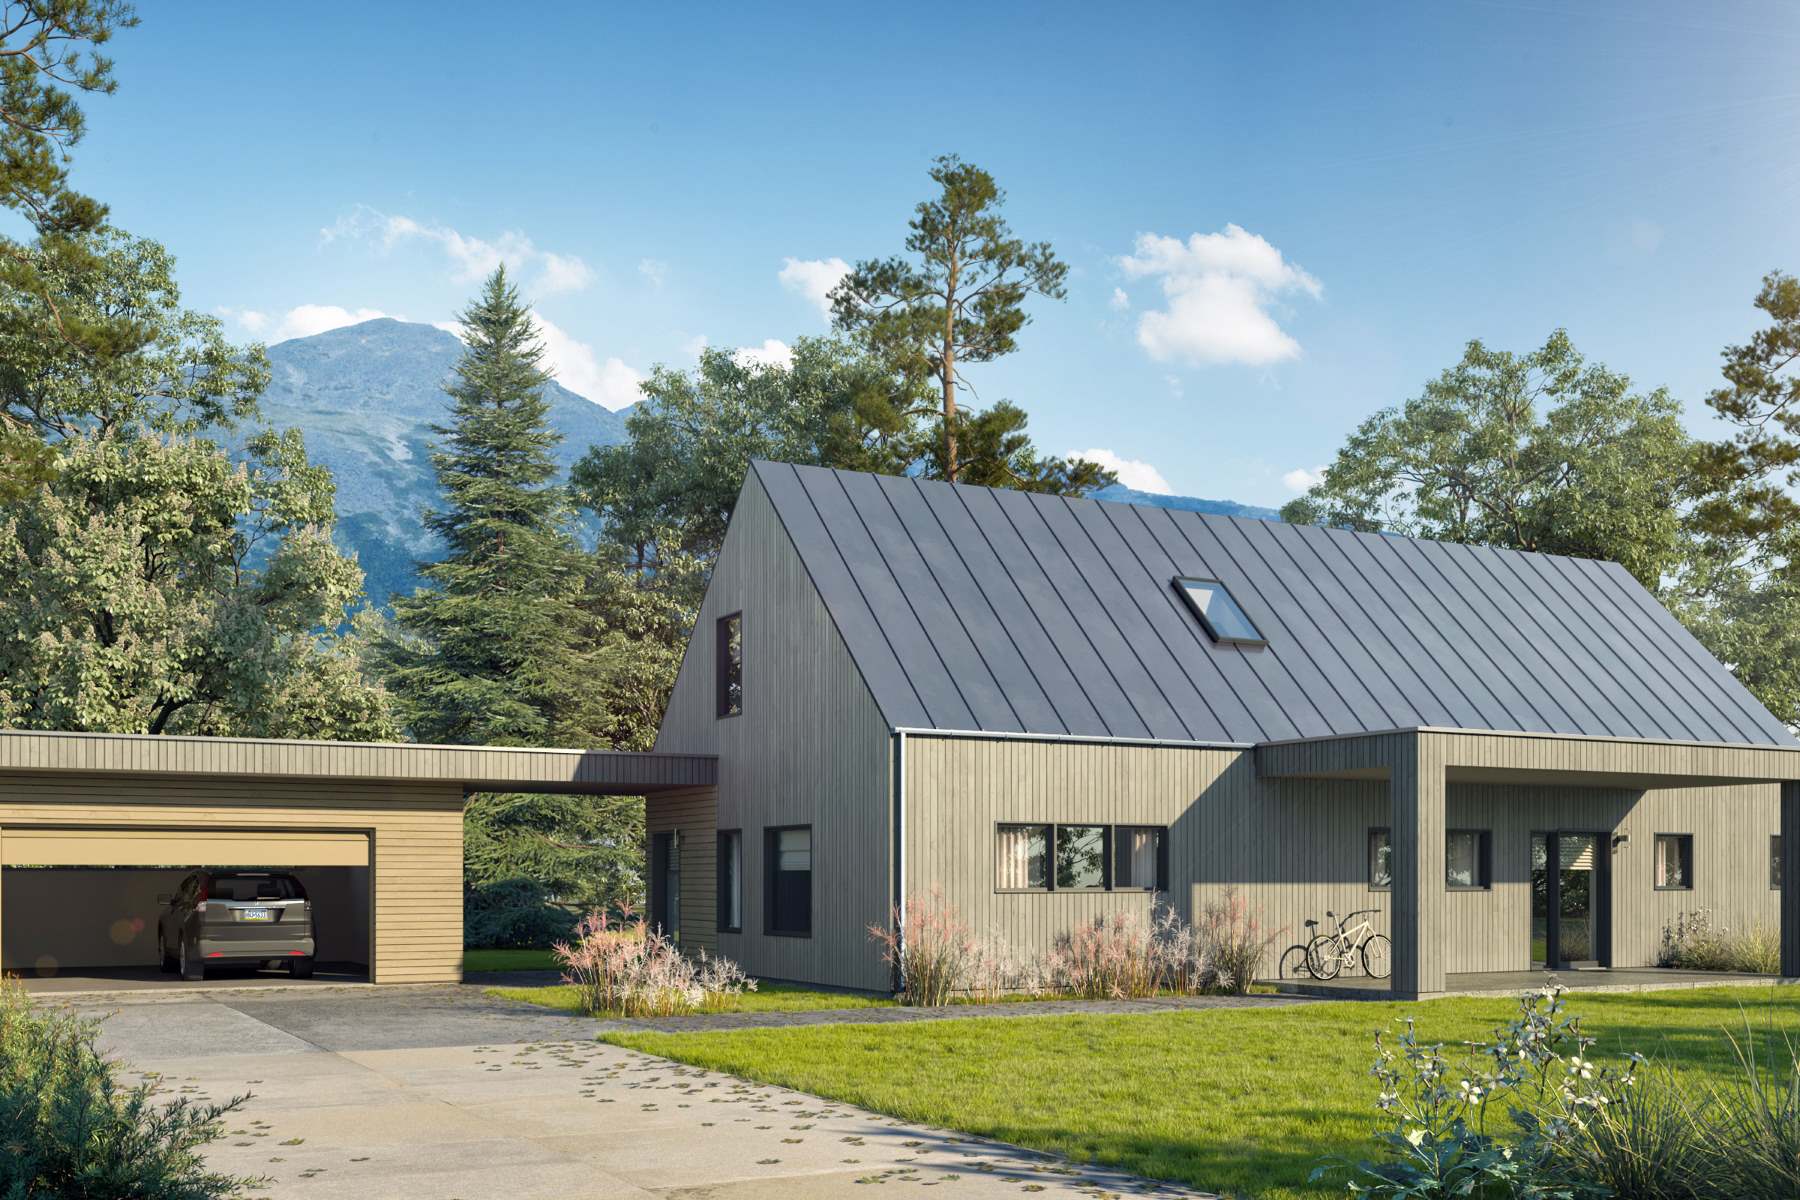 How To Design And Build An Energy-Efficient Low Maintenance House In Northern California